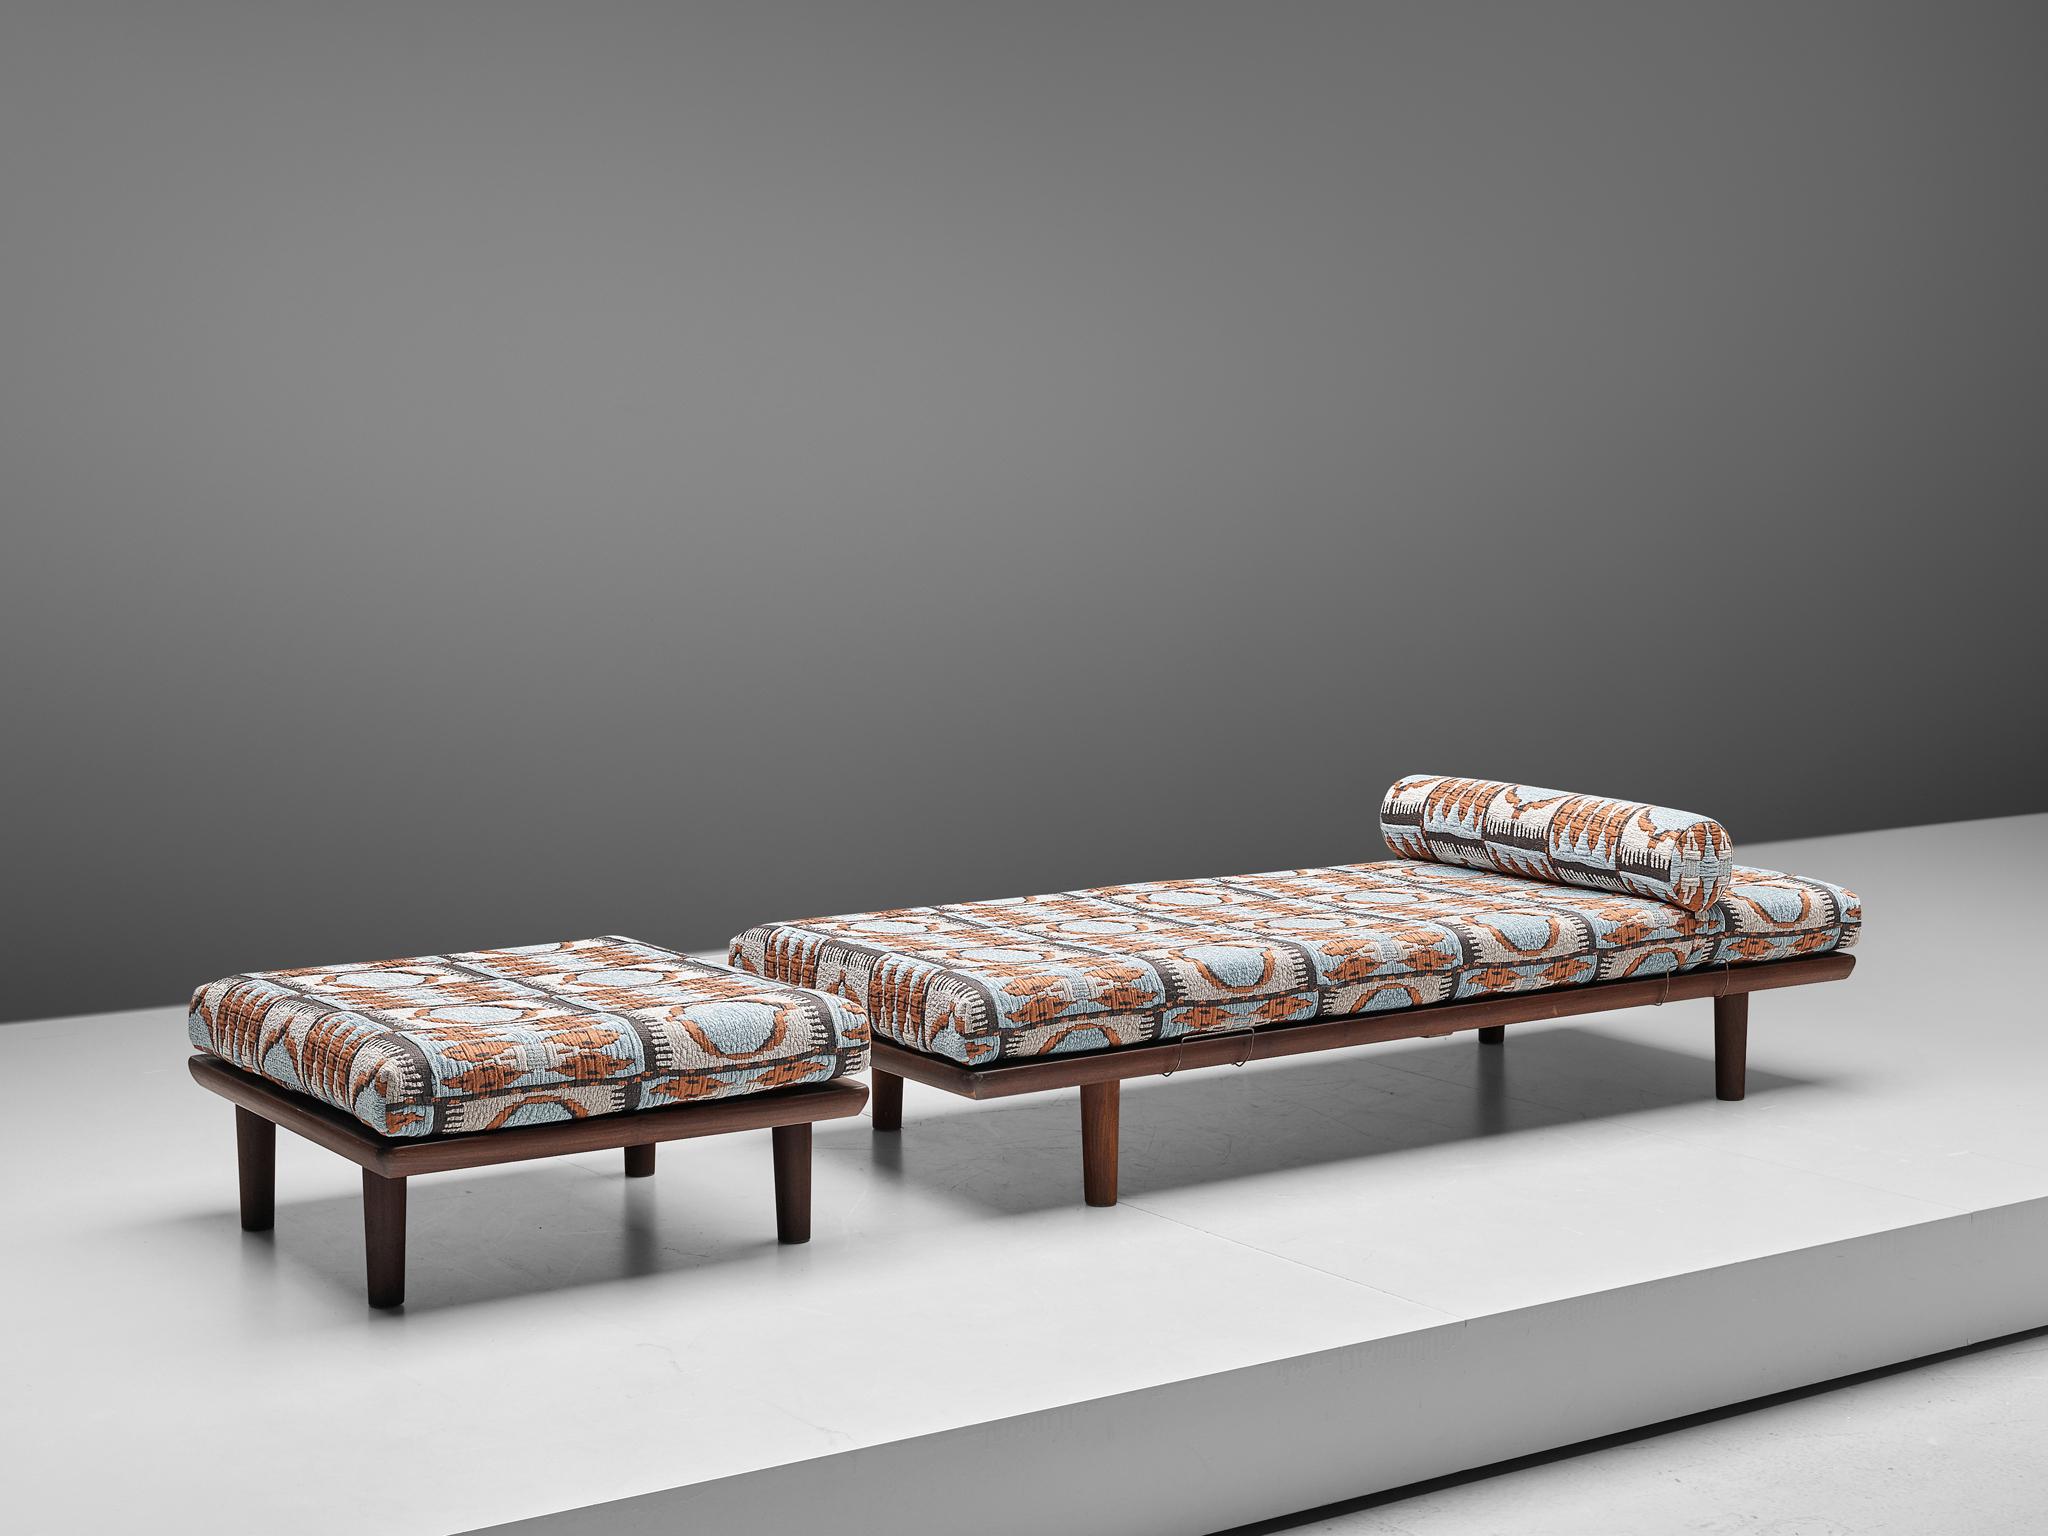 Hans J. Wegner for GETAMA, daybed GE19, oak and fabric, Denmark, 1950s.

Scandinavian Modern daybed GE19 in oak, designed by Hans J. Wegner for Getamain the 1950s. Solid Oak is used for the legs and the frame. The brass support bars on both sides